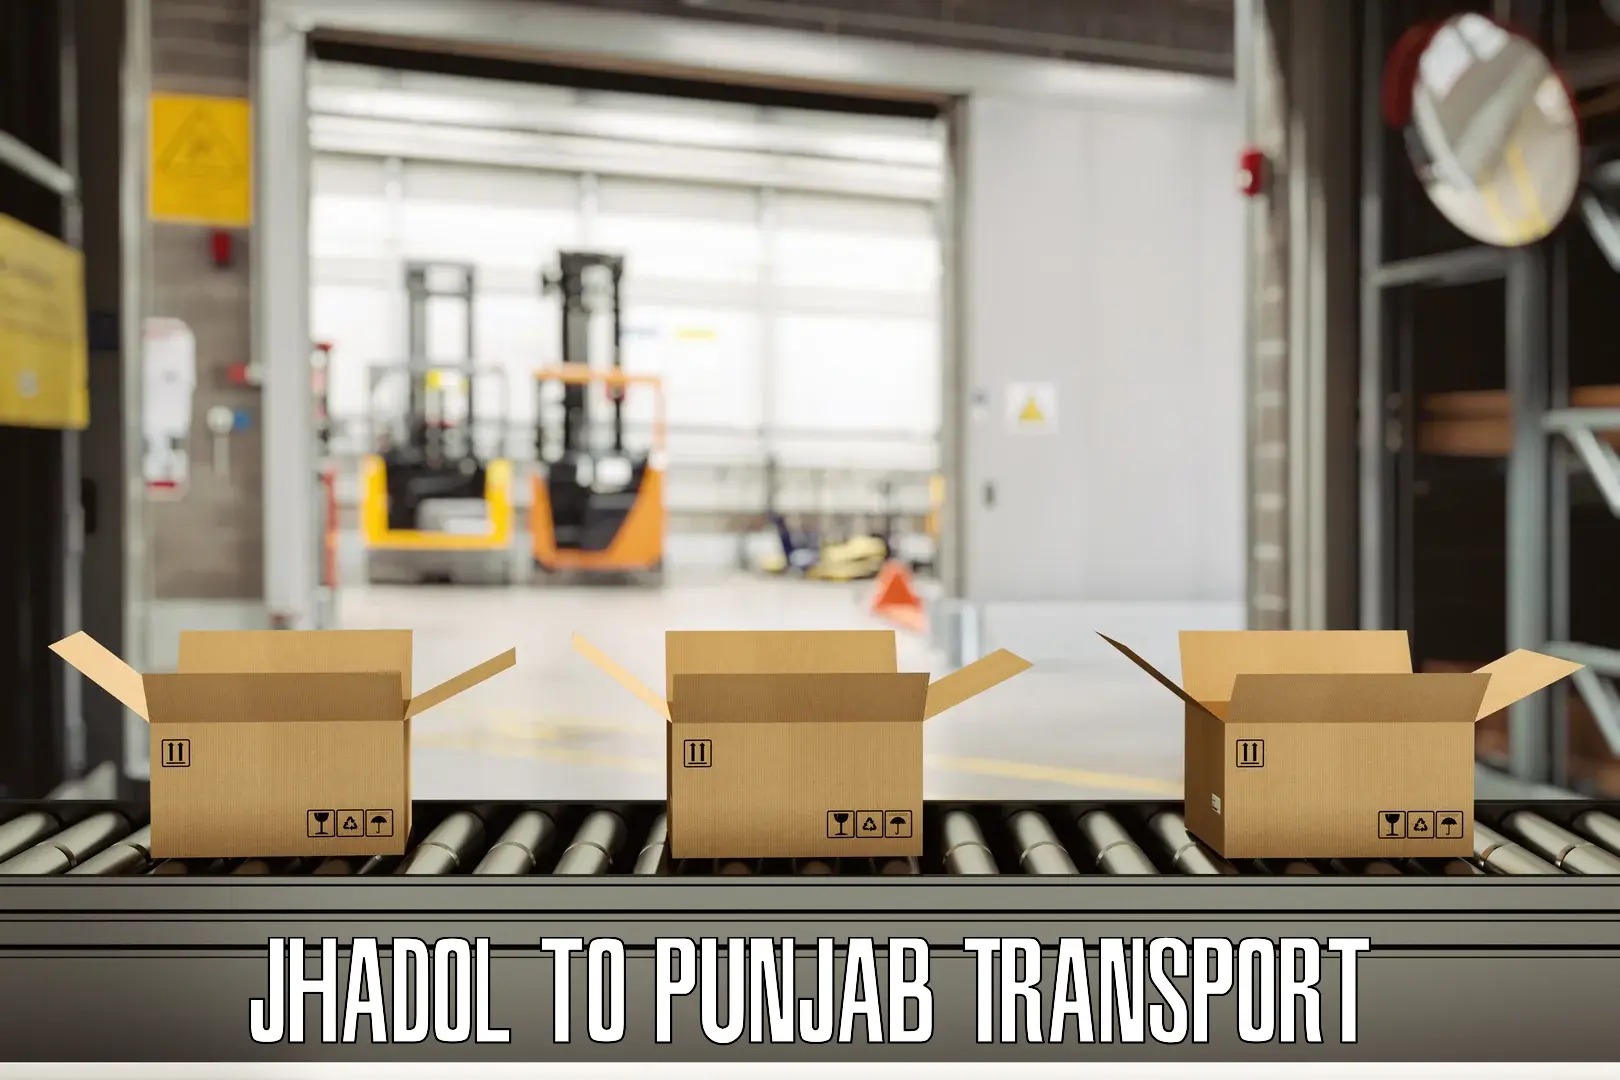 Road transport services Jhadol to Mohali